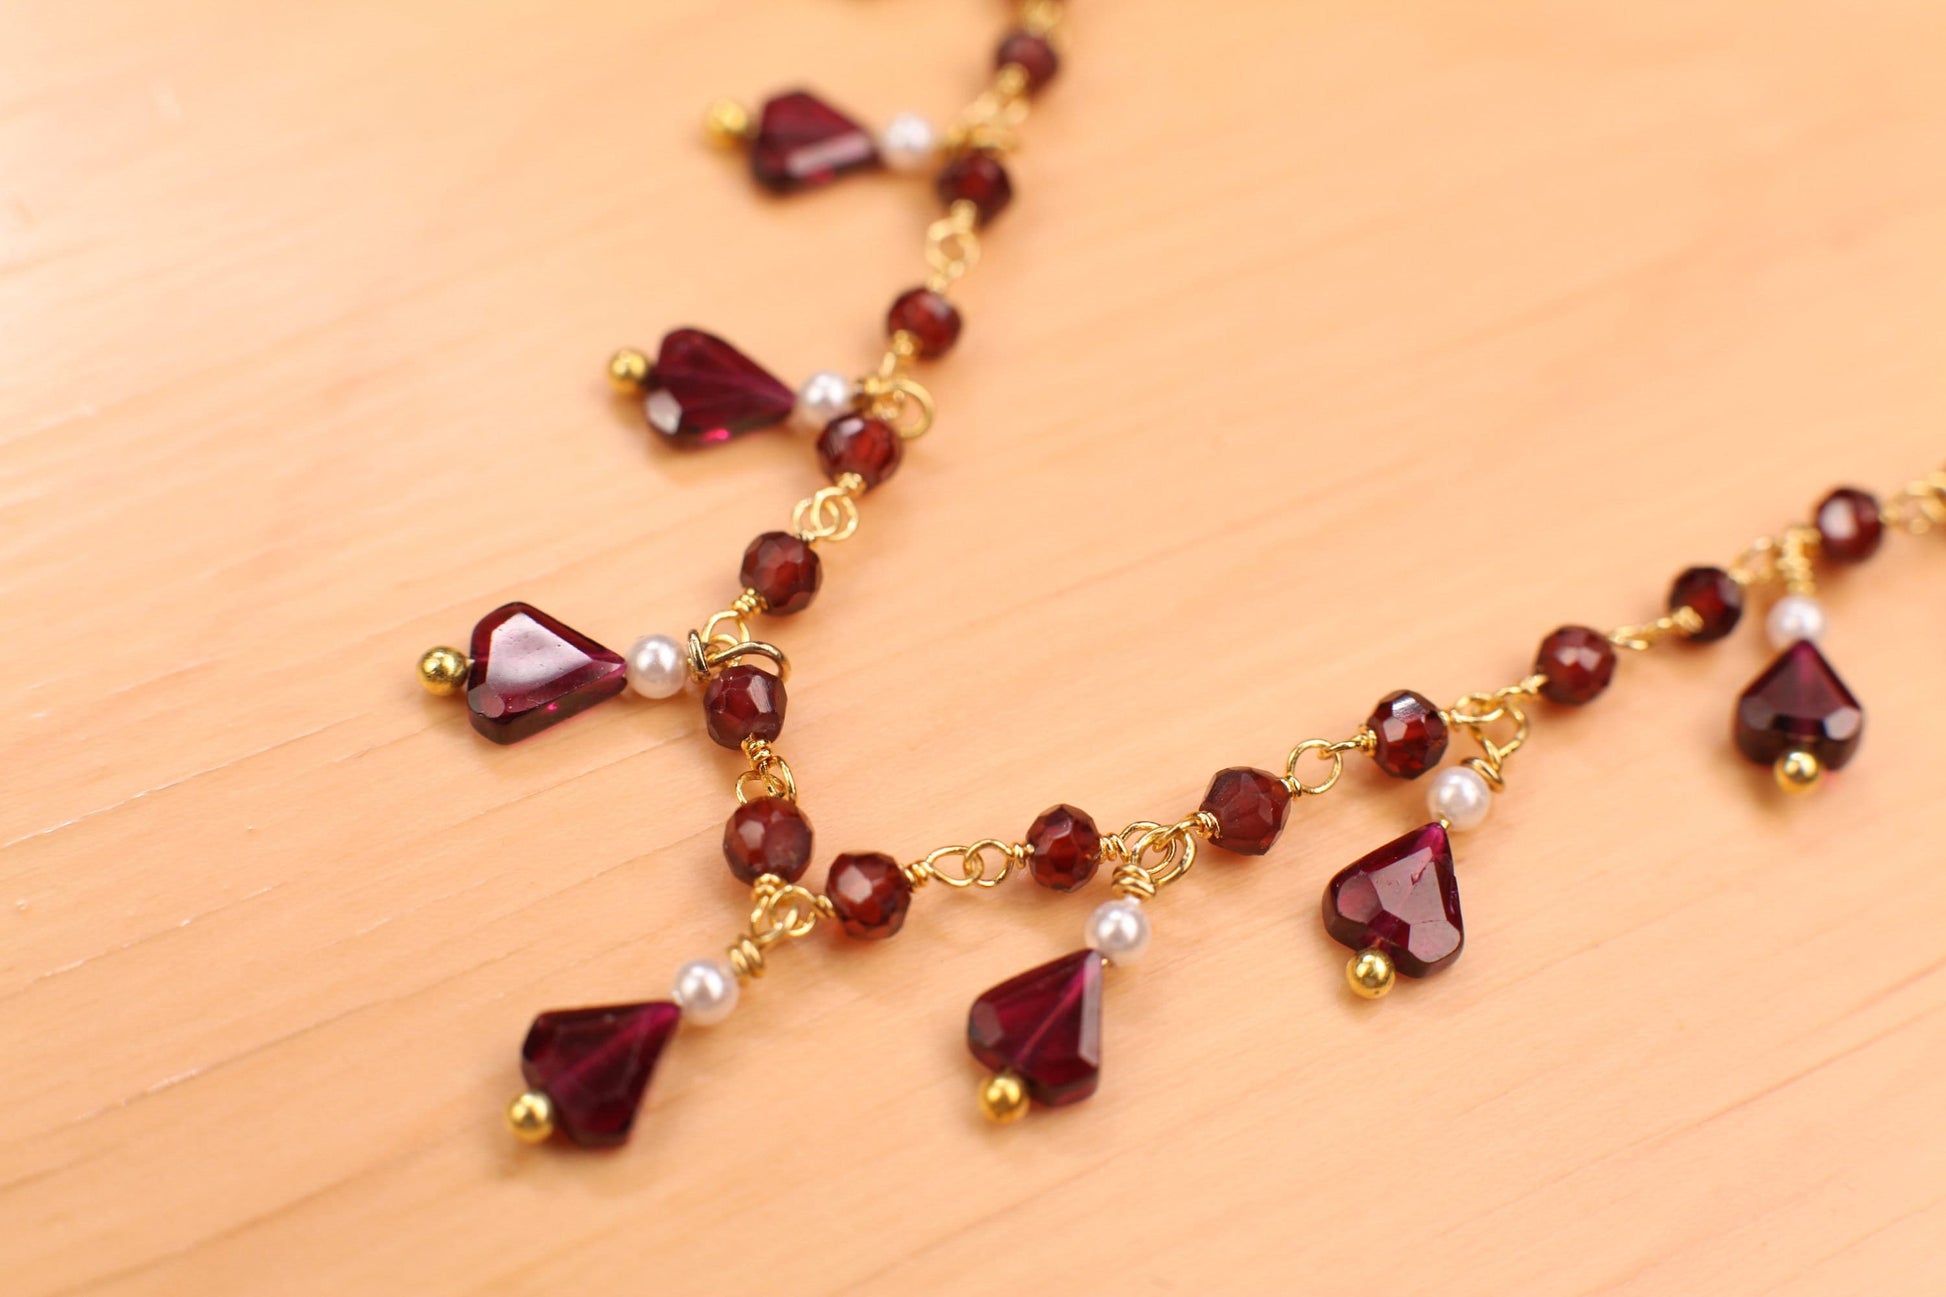 Genuine Garnet Faceted Merlot Red Clusters and Dangling Garnet Freshwater Pearl Wire Wrap Handmade Gold Necklace, Bridal Gift